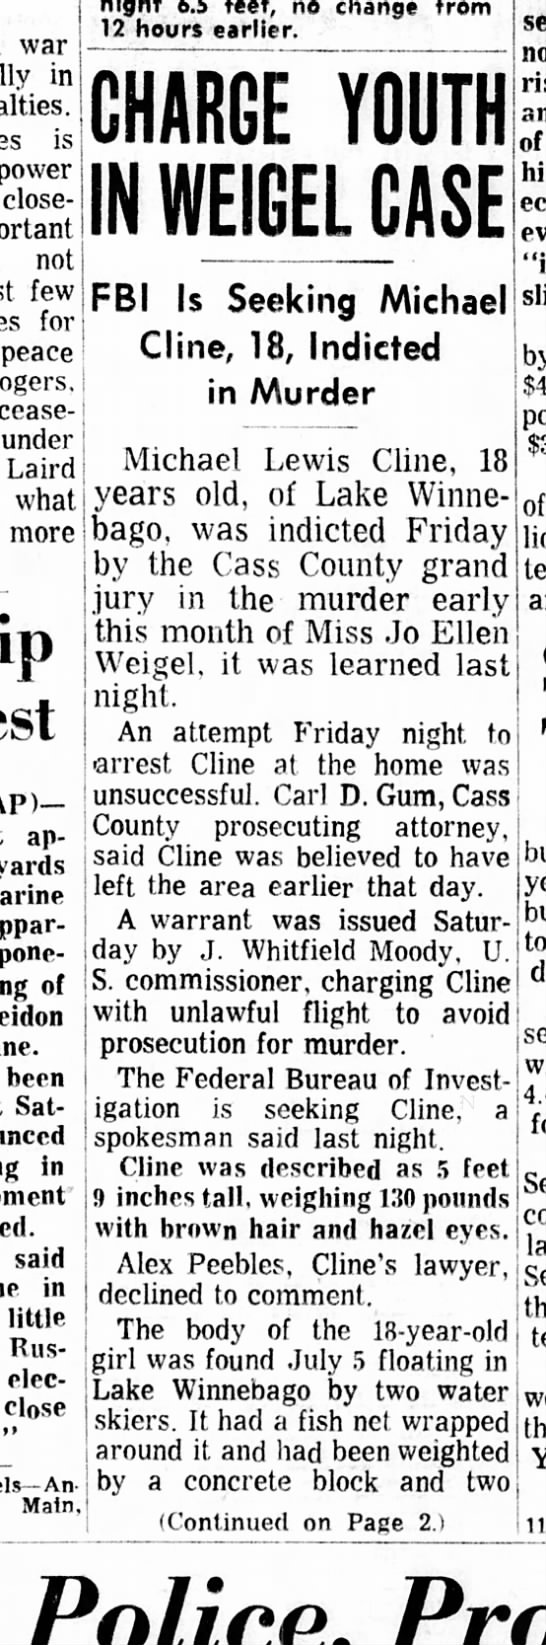 Michael Lewis Cline indicted in murder article (pg 1) - 